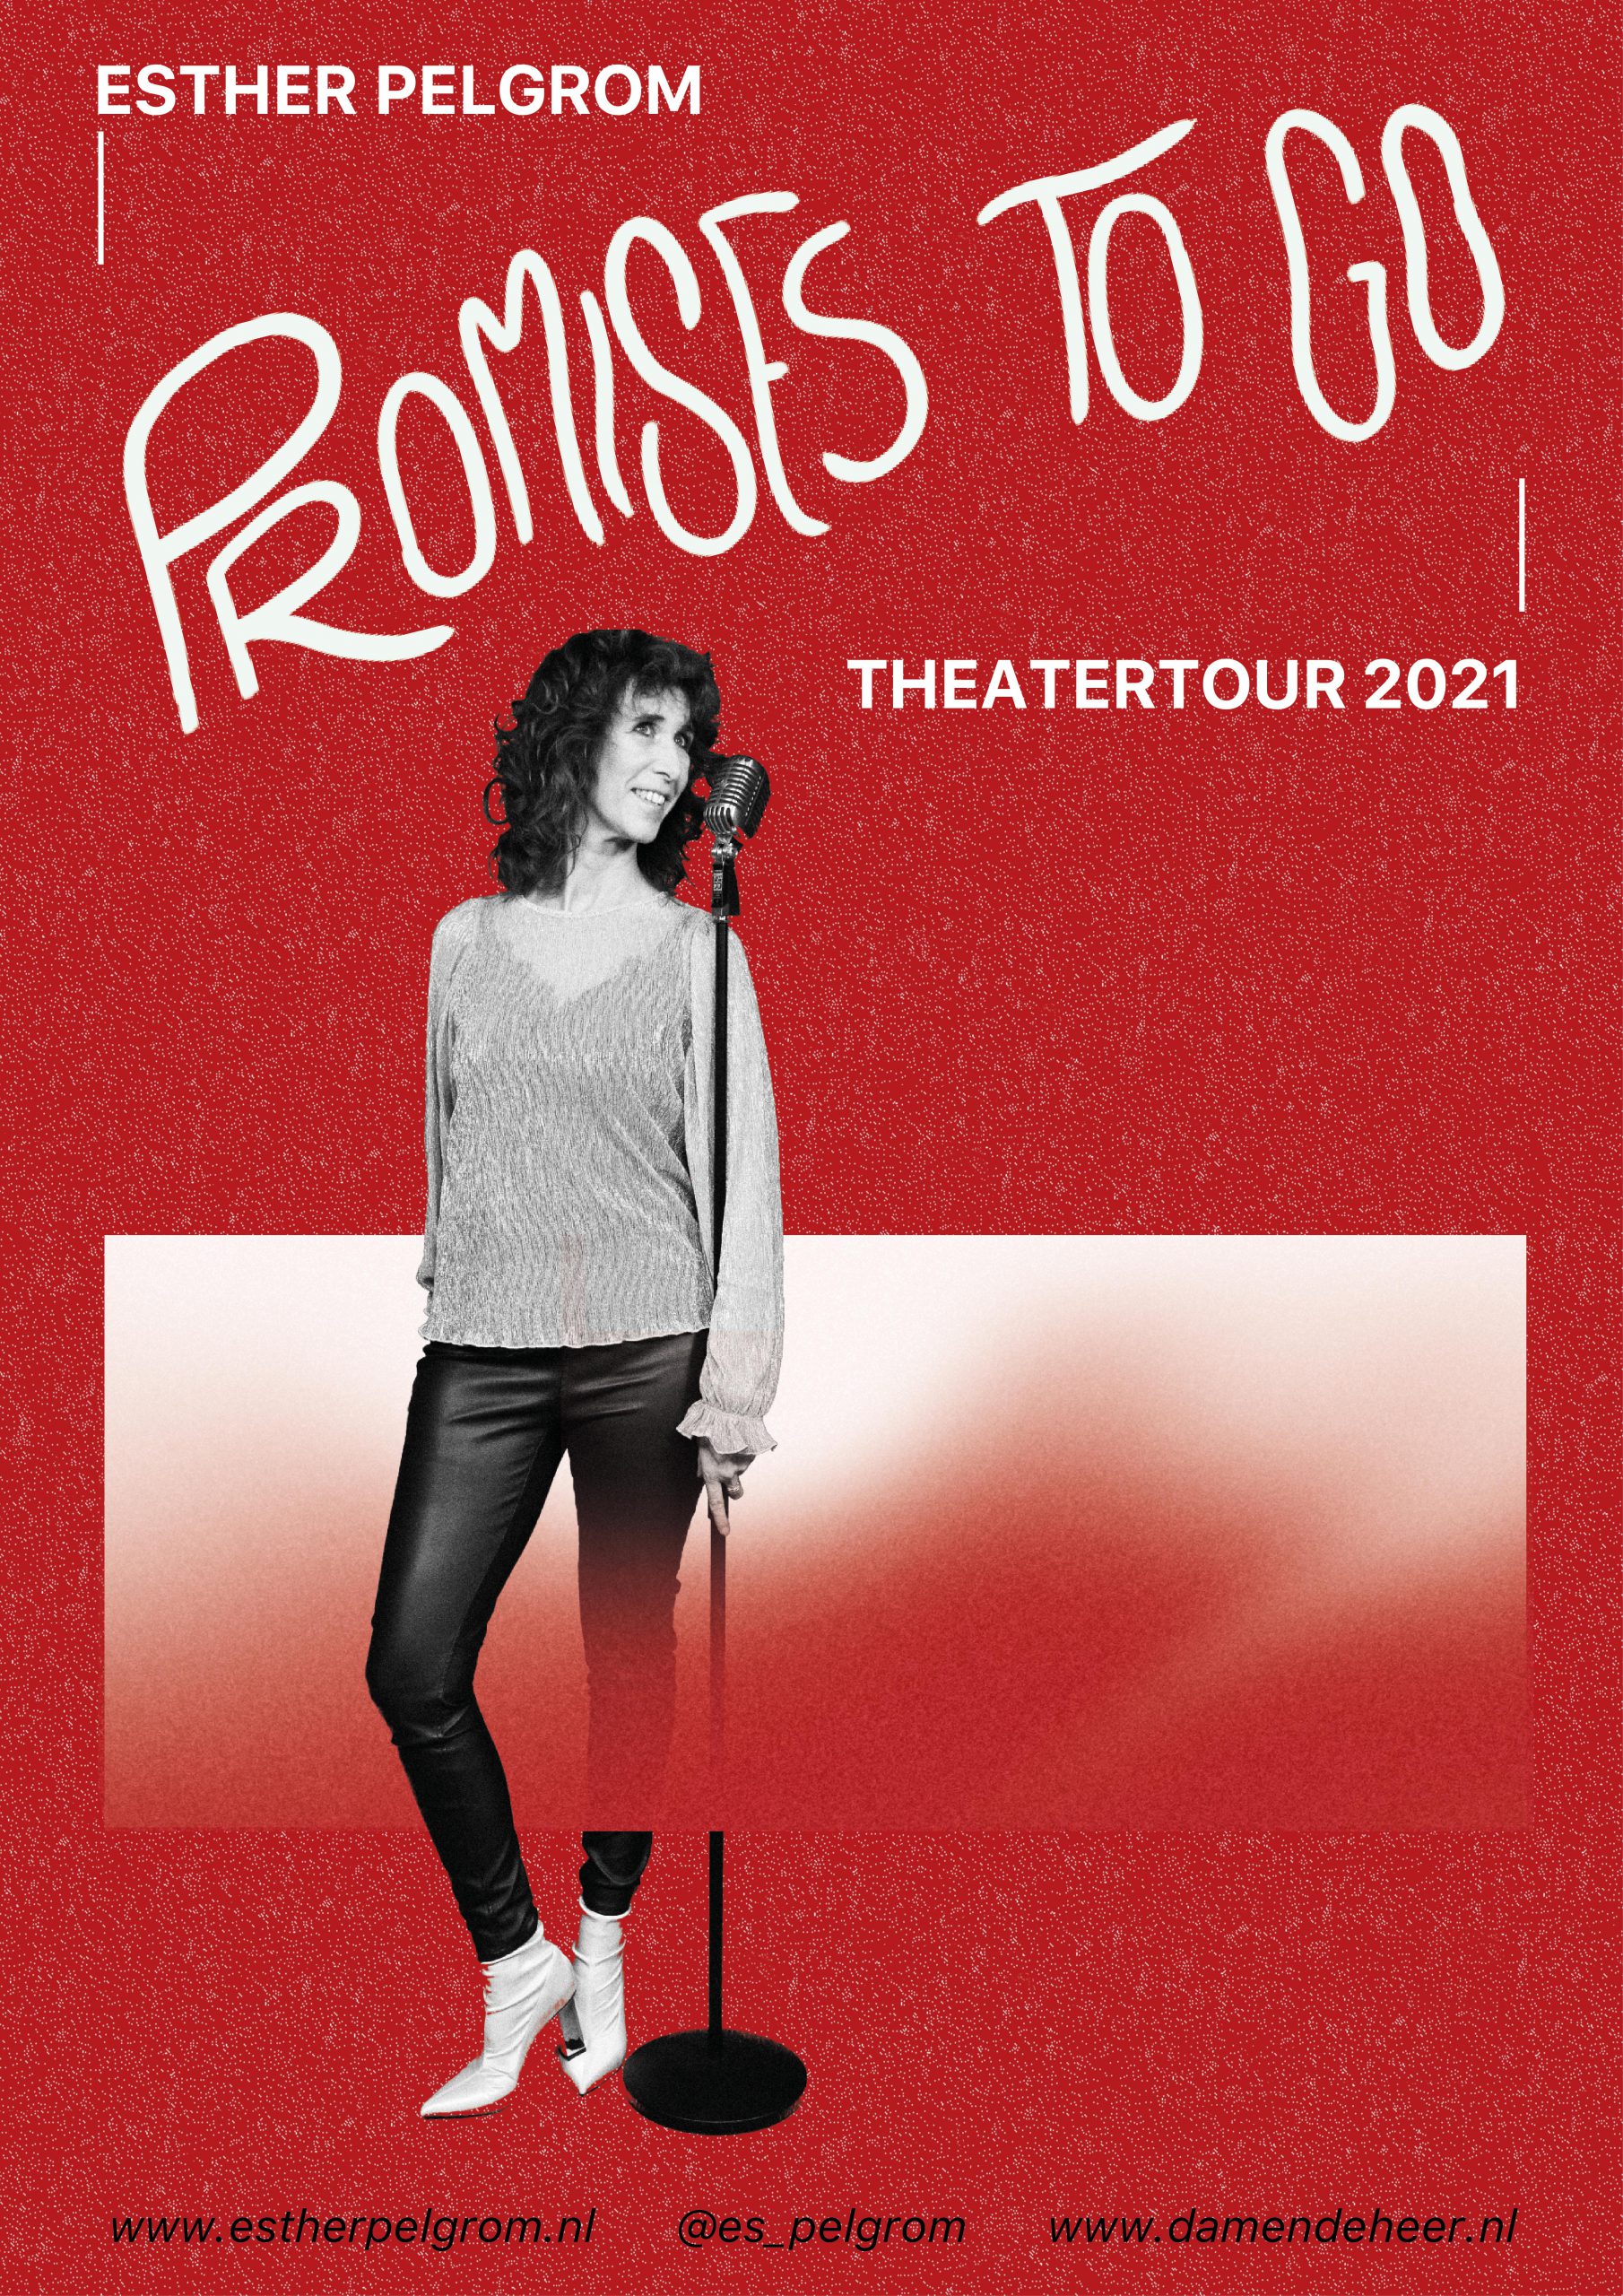 Esther Pelgrom – Promises to go (tryout)